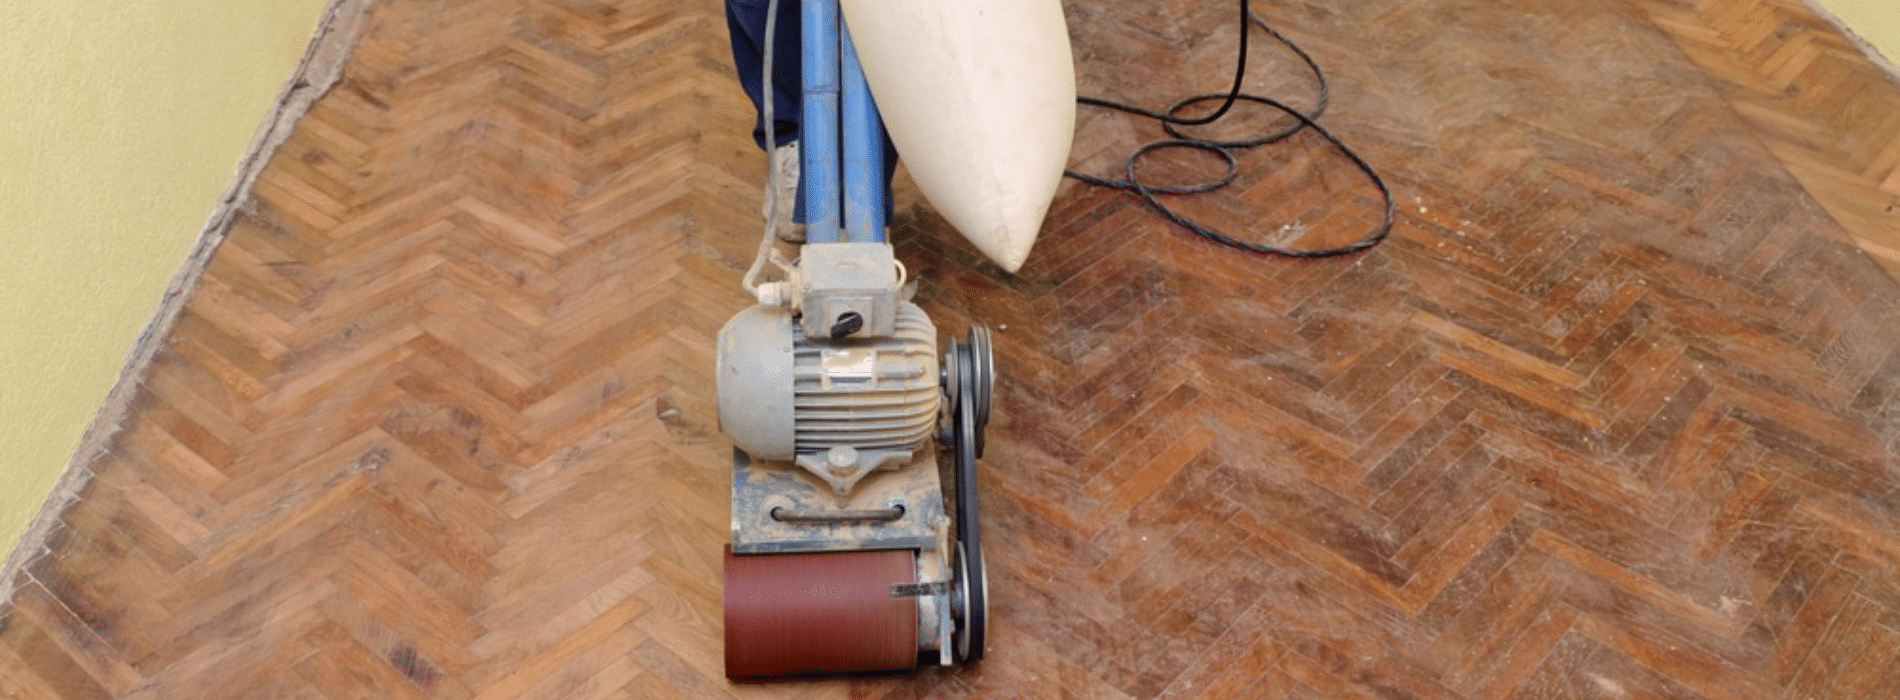 Mr Sander® in Lambeth, SE11, employing the powerful Bona Belt Effect sander (2.2 kW) for sanding herringbone floors. Operating at 230V and 50Hz/60Hz, this 250x750 mm sander, equipped with a dust extraction system and HEPA filter, guarantees a pristine and efficient outcome.